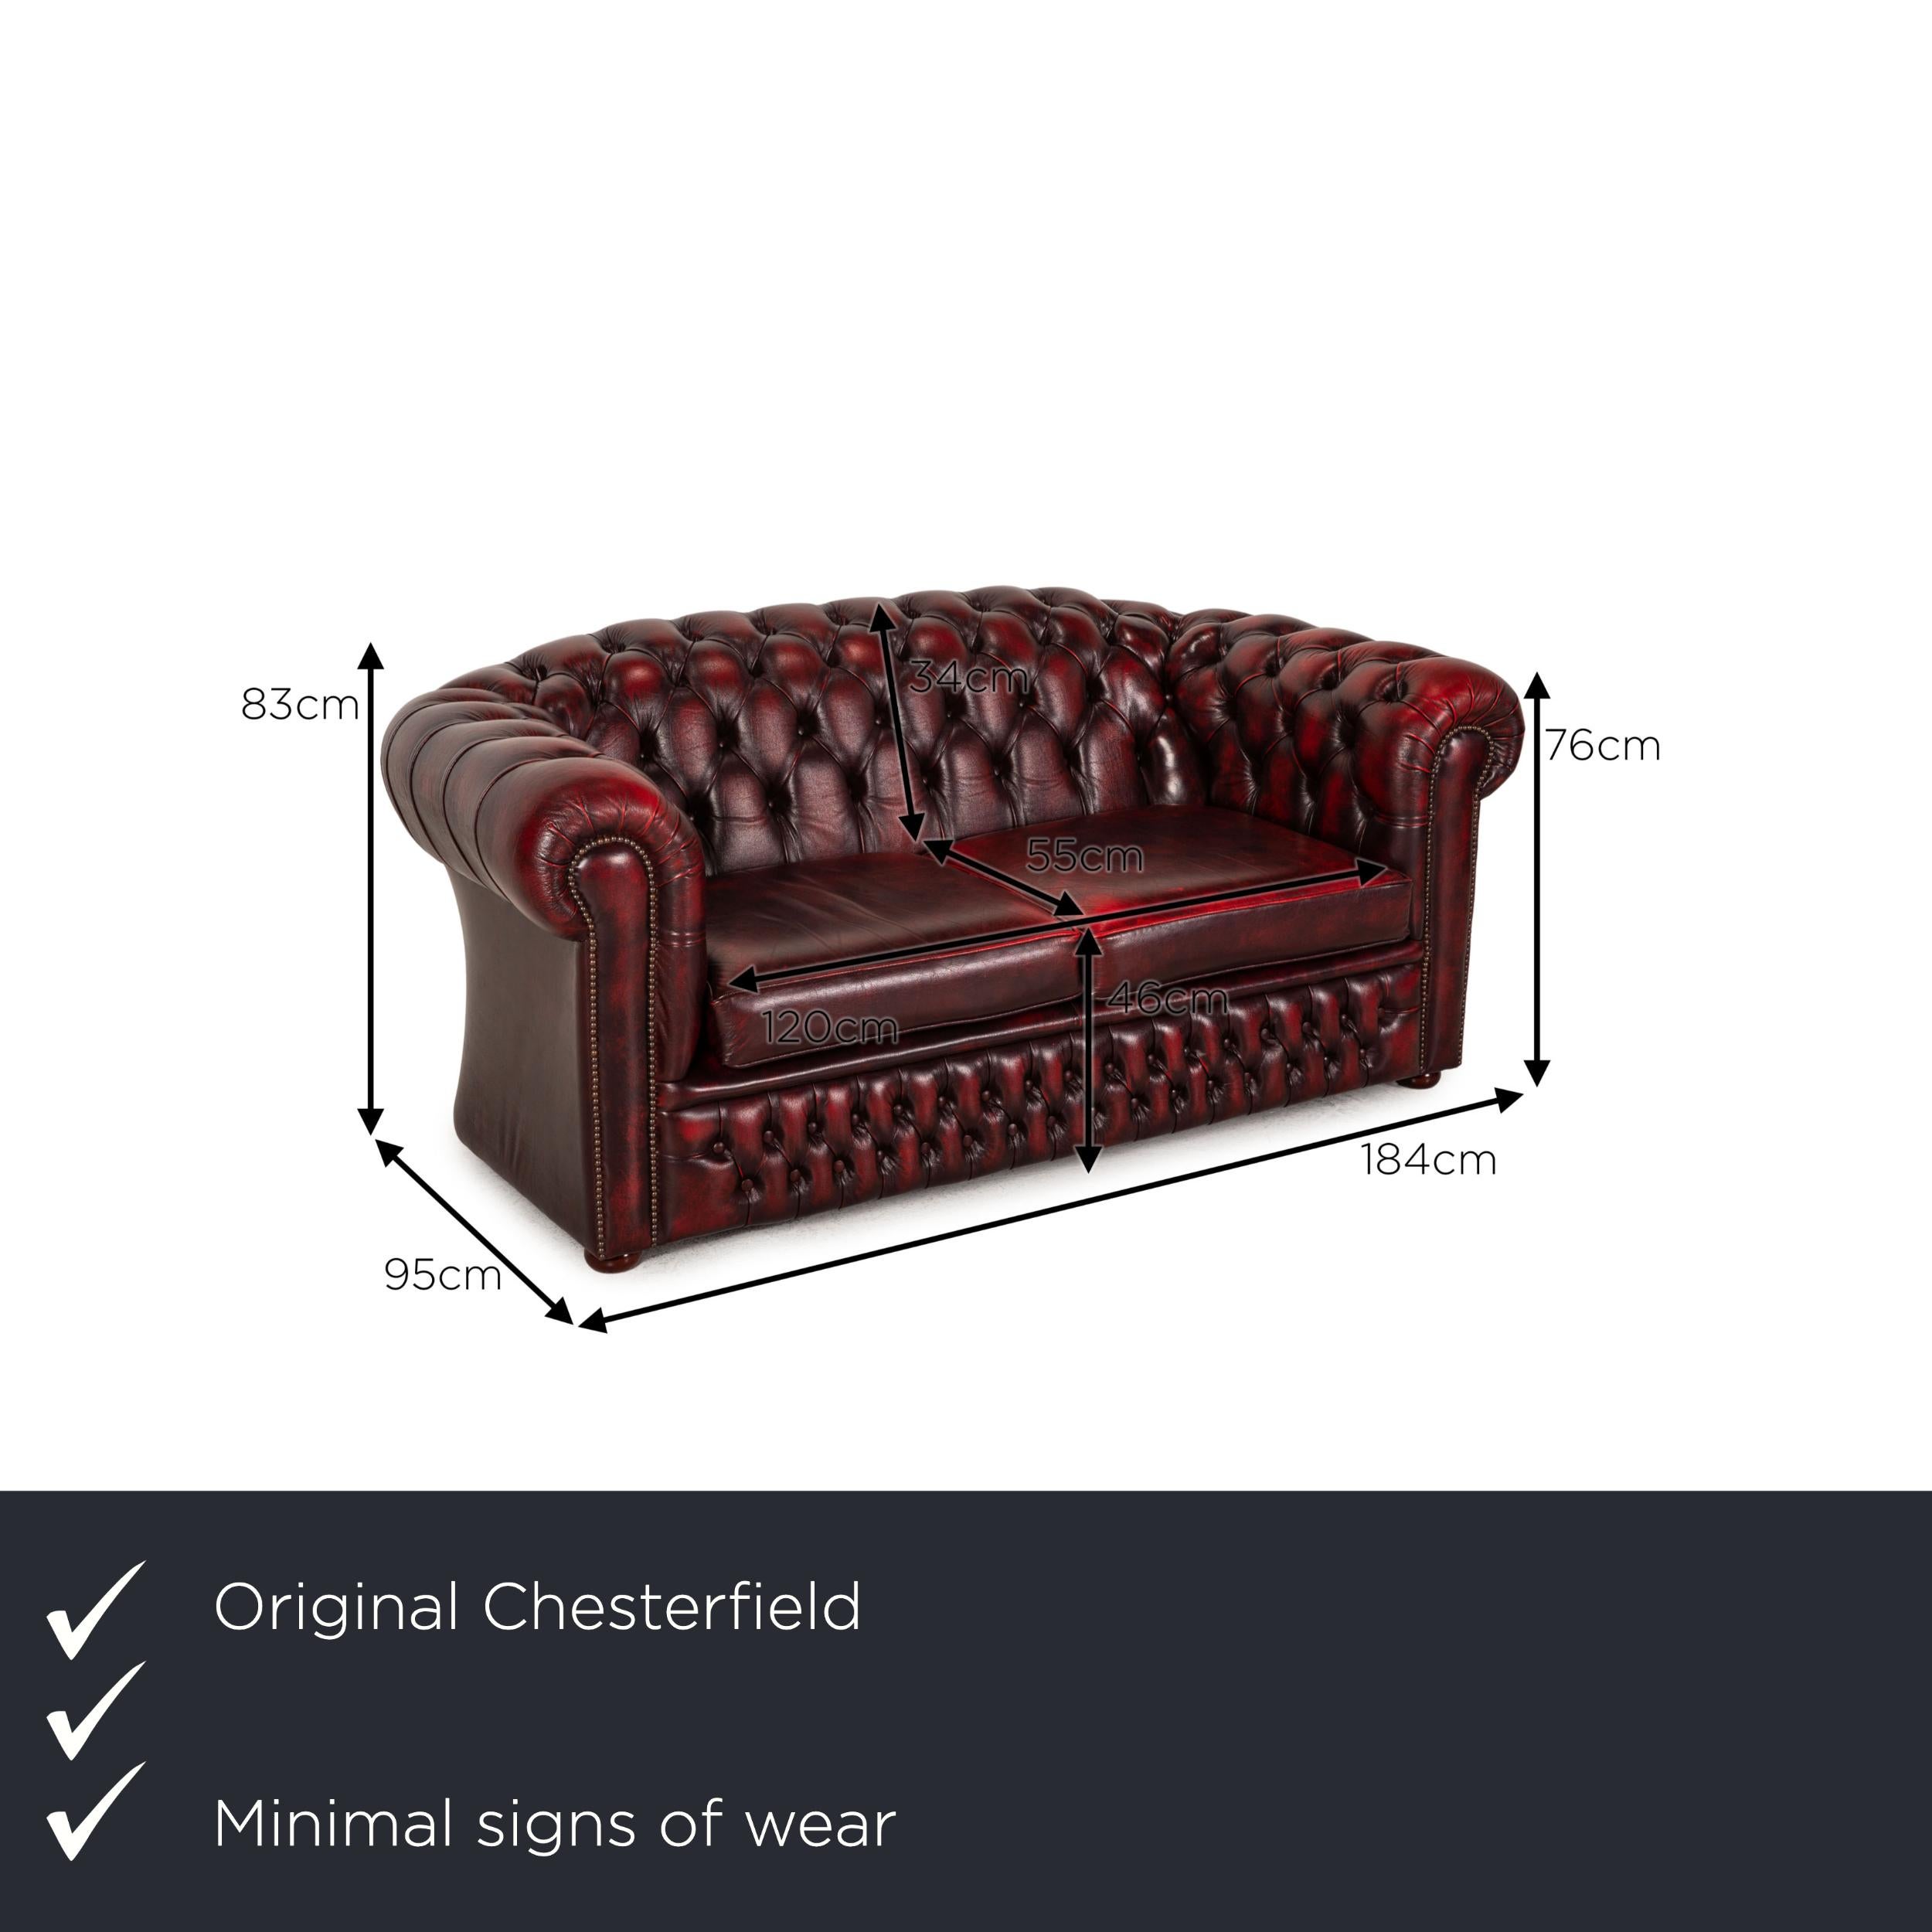 We present to you a Chesterfield Tudor leather sofa dark red two seater couch.

Product measurements in centimeters:

depth: 95
width: 184
height: 83
seat height: 46
rest height: 76
seat depth: 55
seat width: 120
back height: 34.
 
 